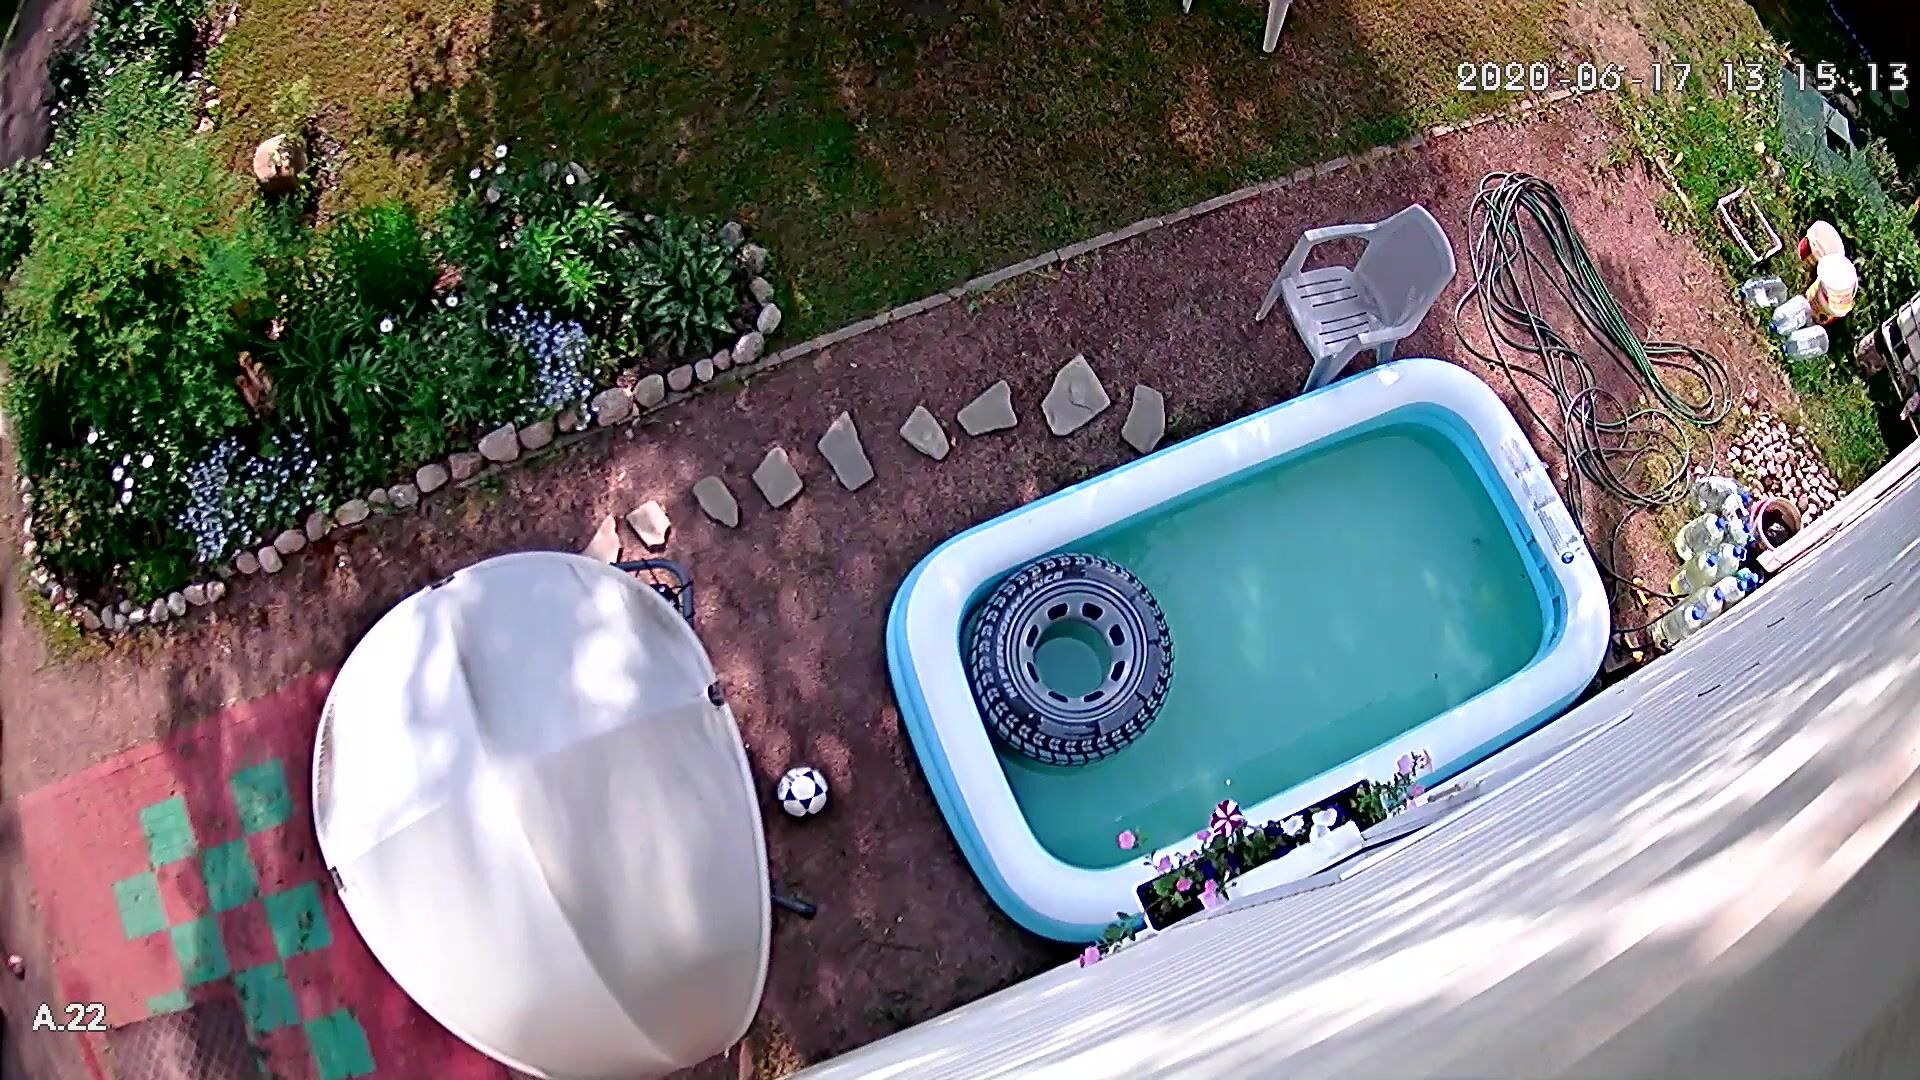 Security Pool - Security camera catches couple having porn in pool